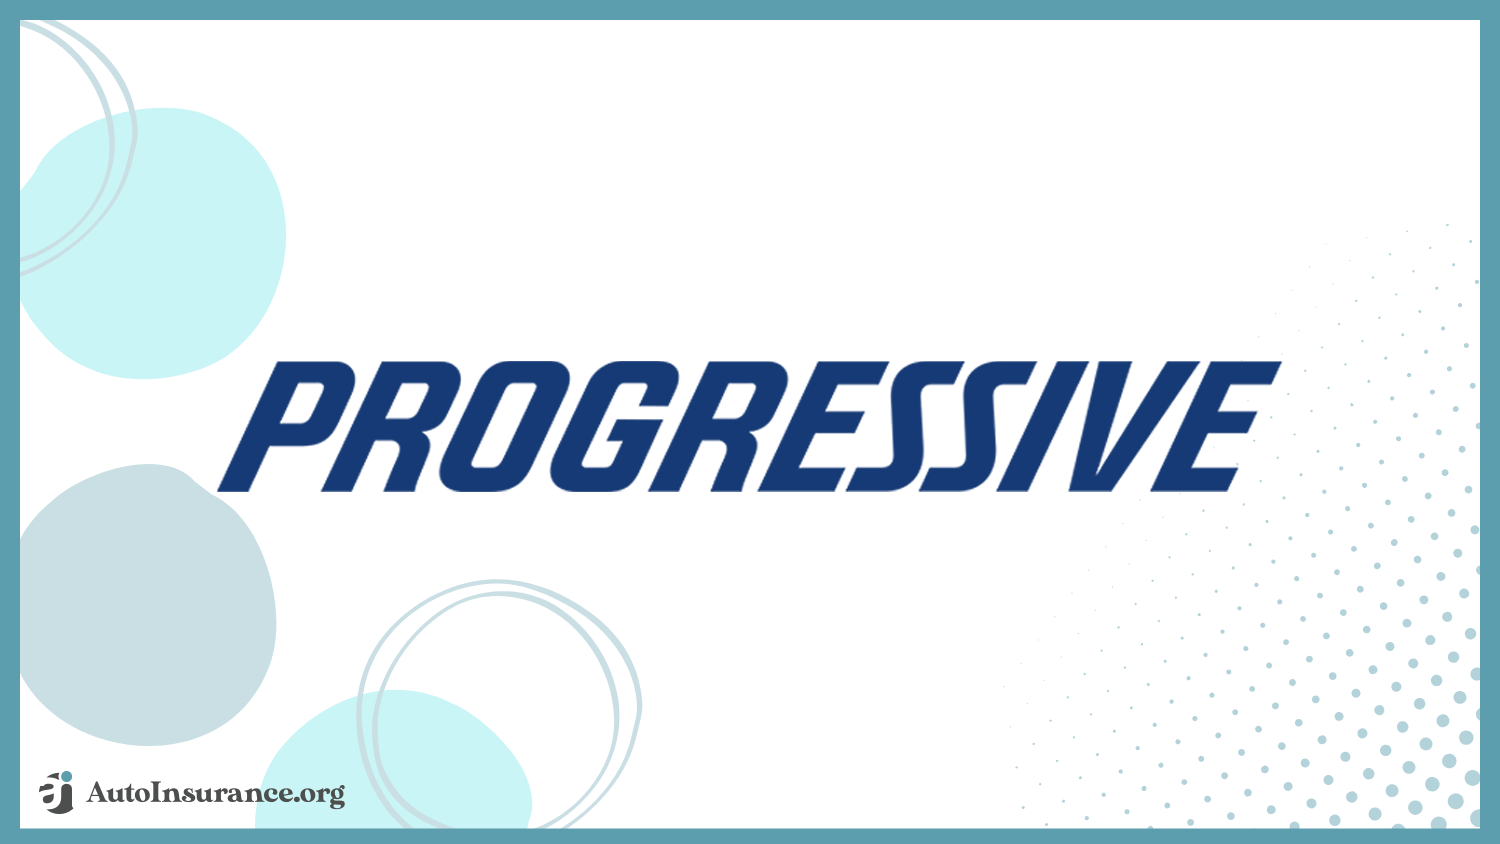 Progressive: Best Auto Insurance for Wheelchair-Accessible Vehicles